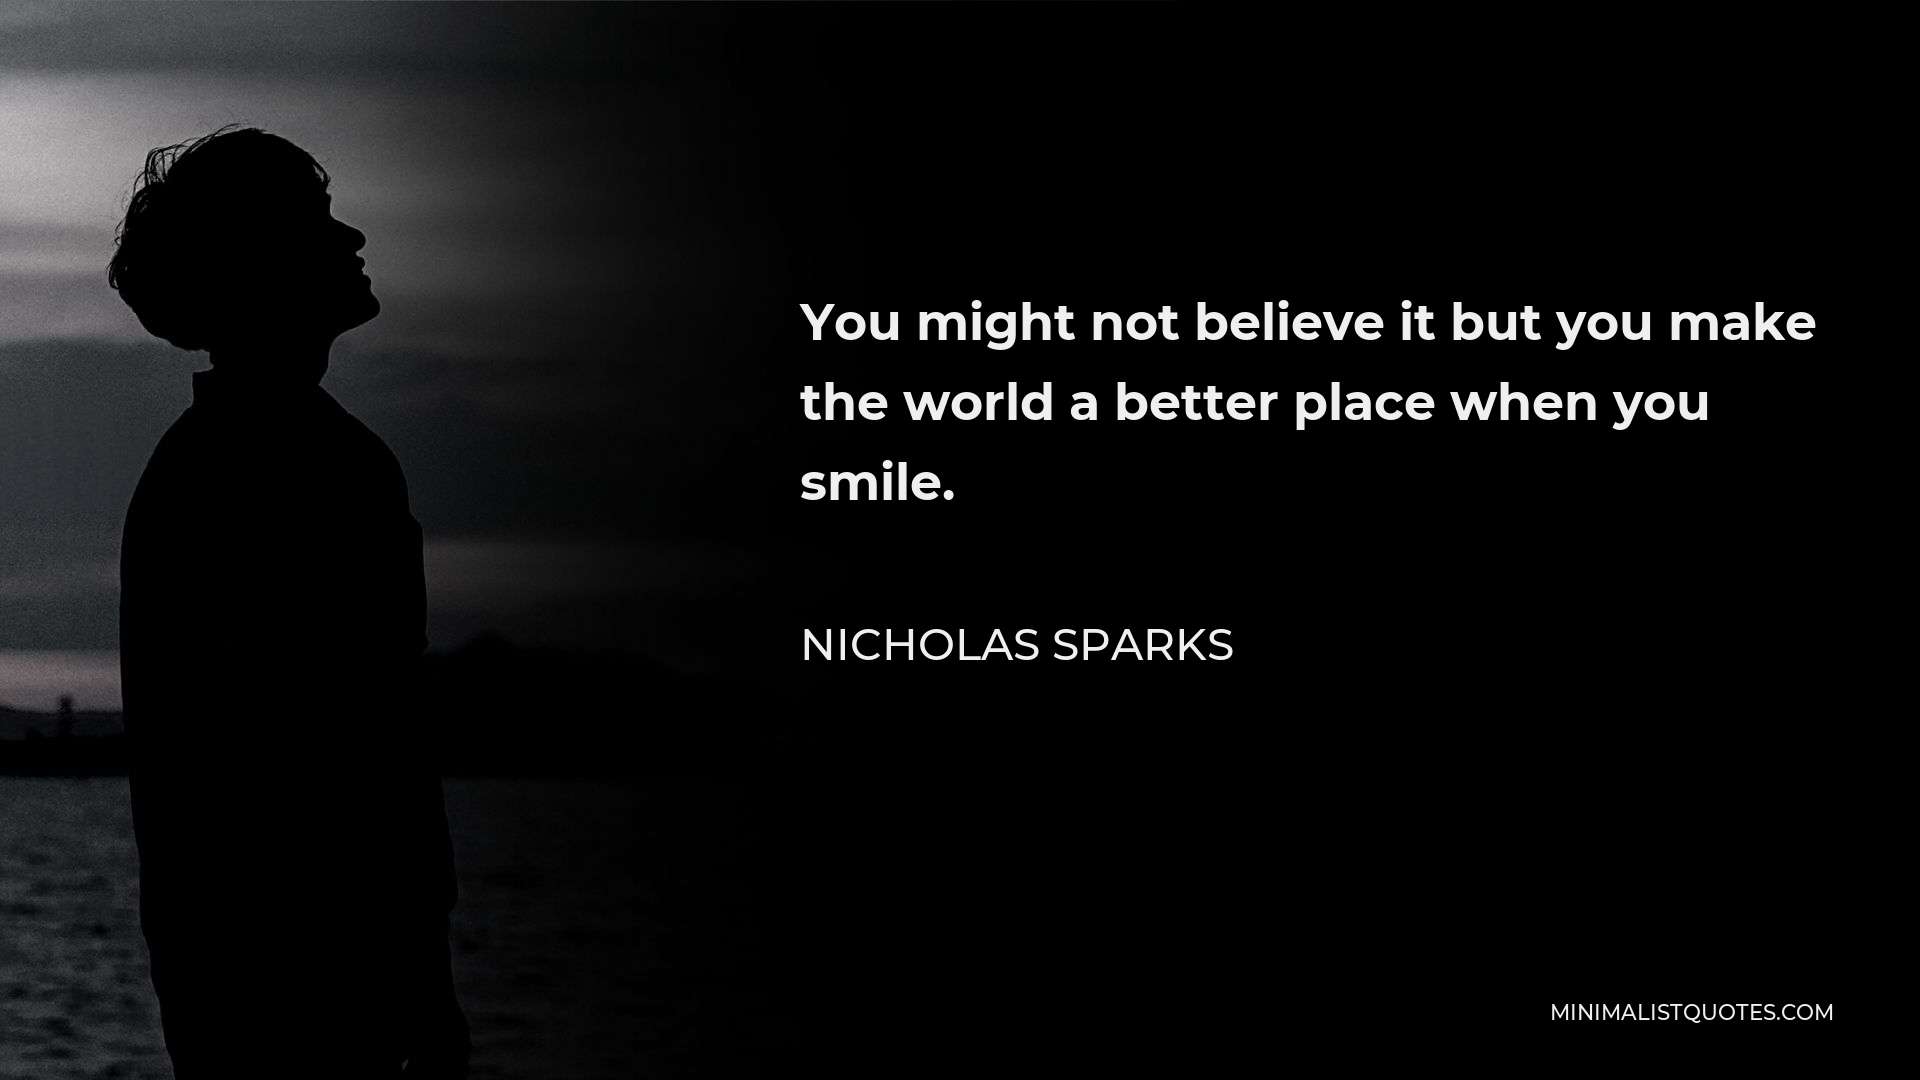 Nicholas Sparks Quote - You might not believe it but you make the world a better place when you smile.